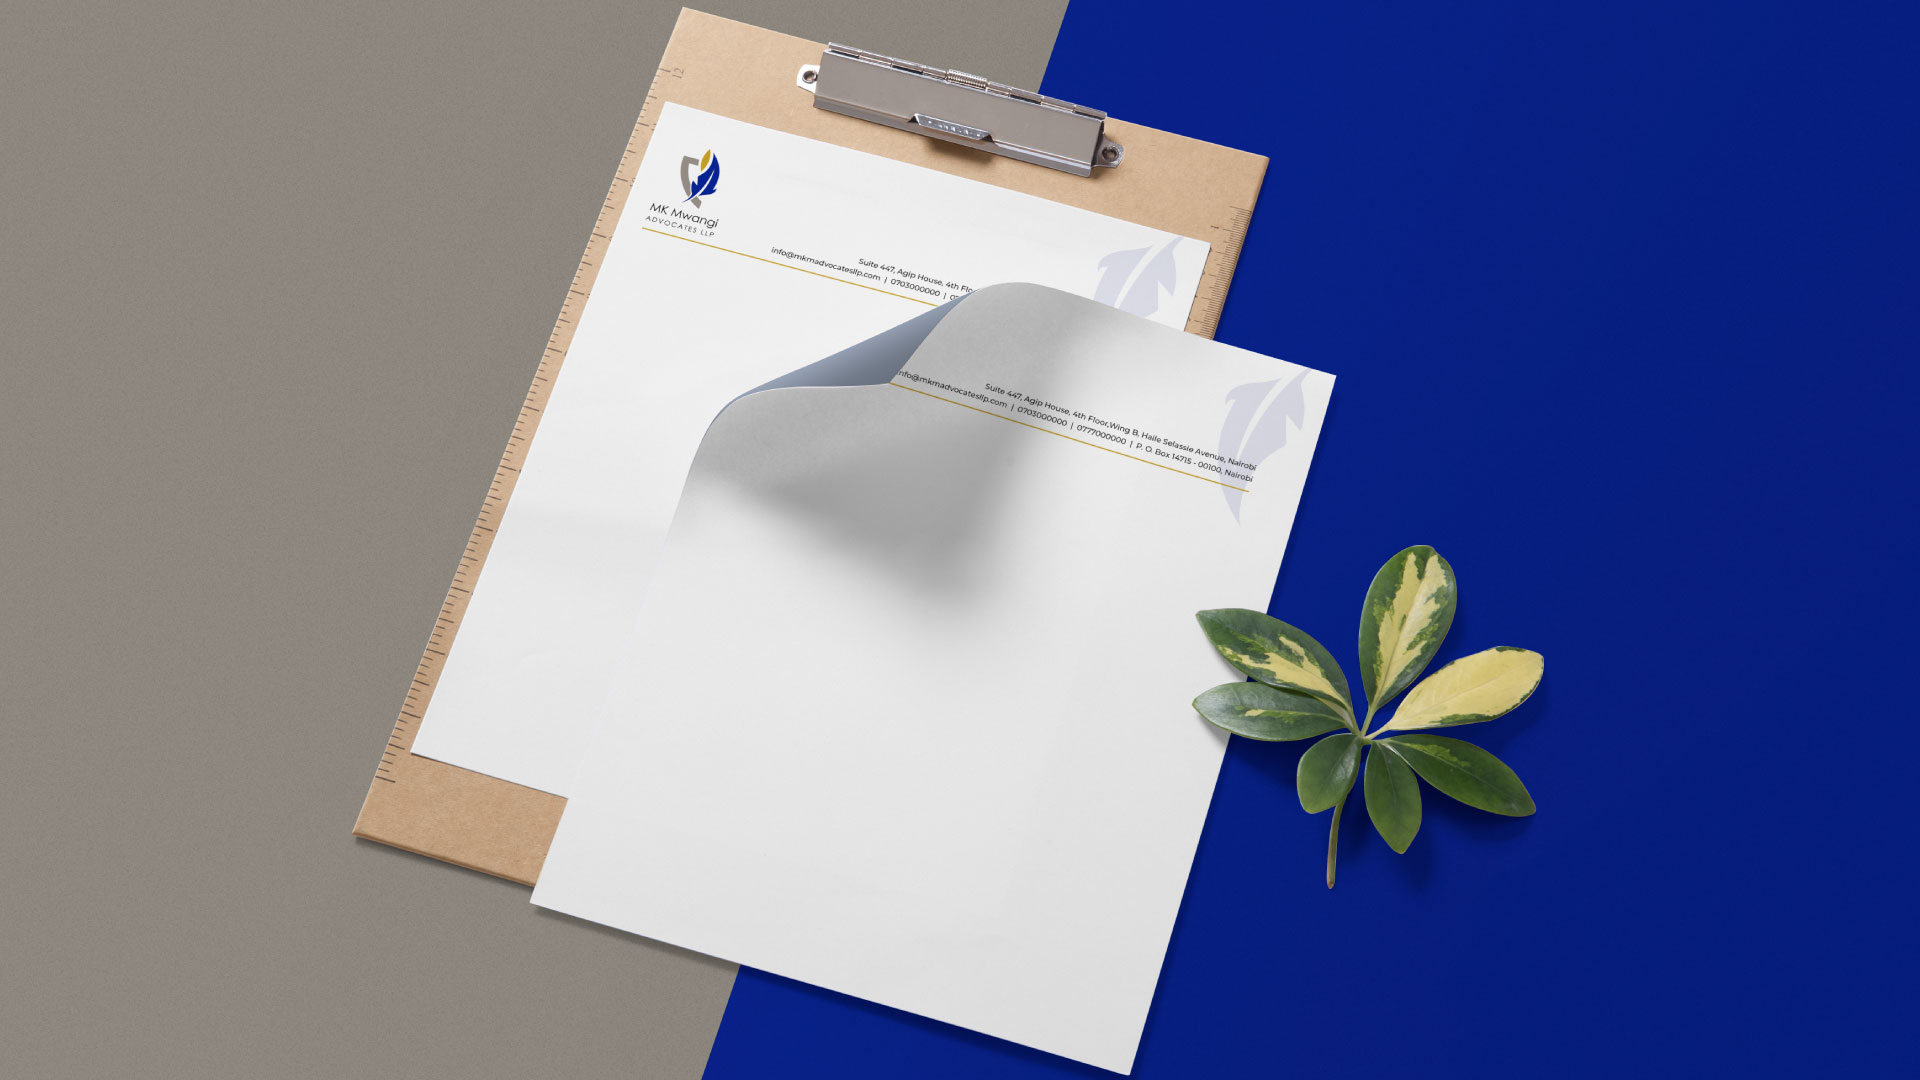 Marketing Collateral, Letterheads for a Law Firm in Kenya